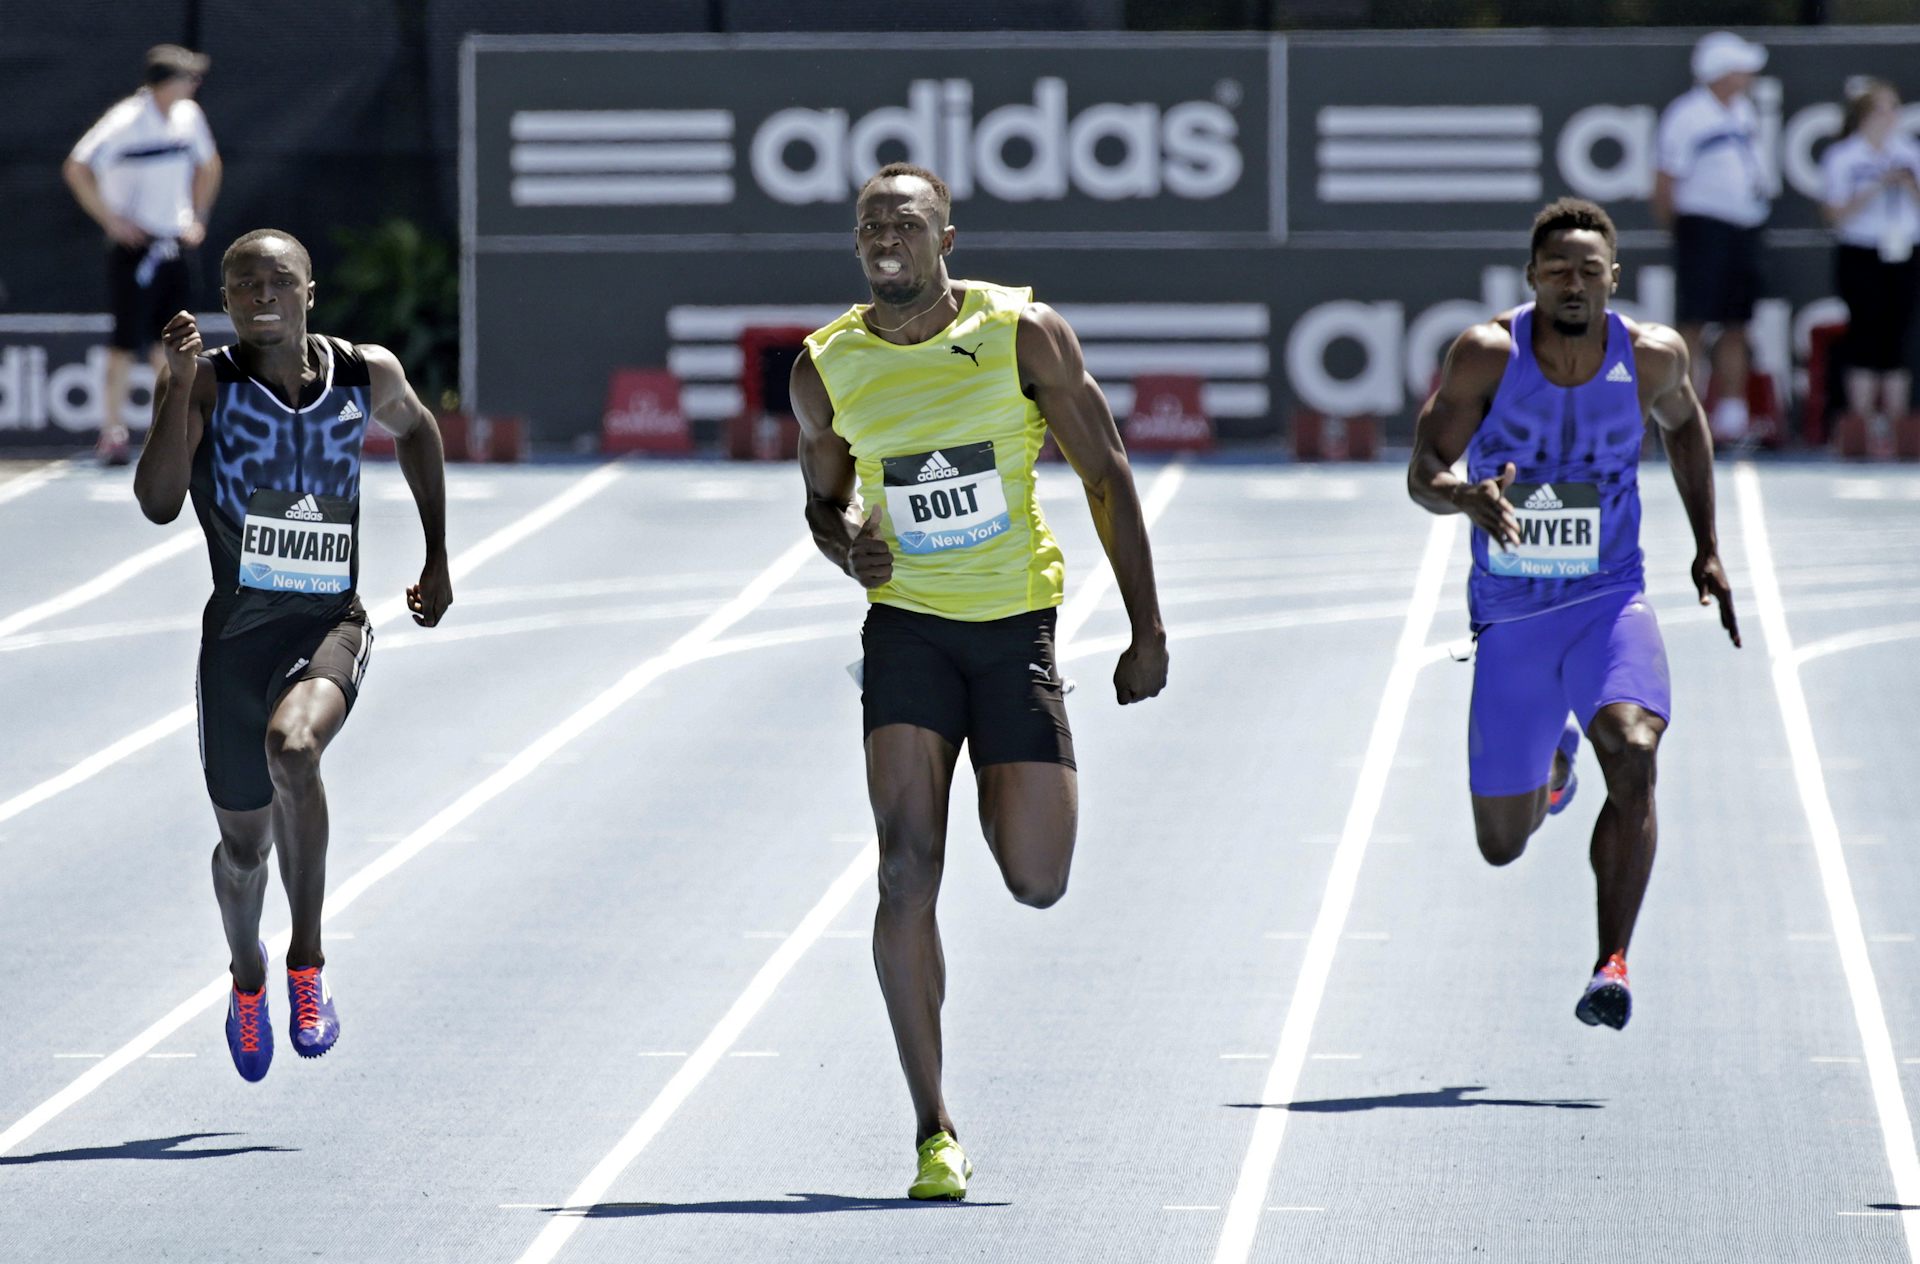 How damaging is an Adidas decision to pull its athletics sponsorship?